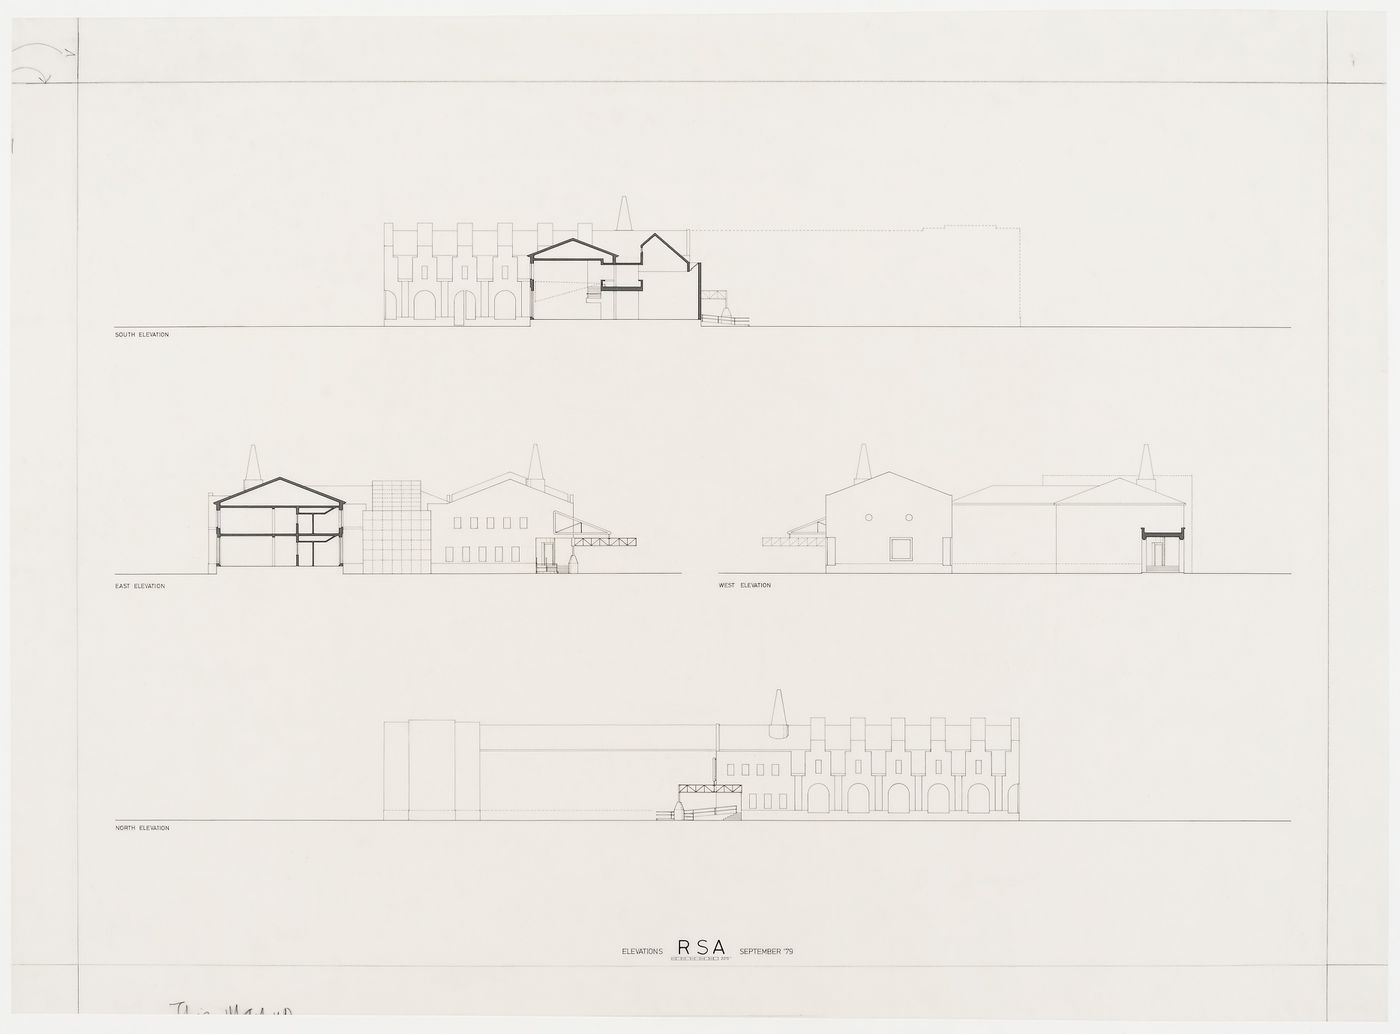 School of Architecture Addition, Rice University, Houston, Texas: elevations and sections